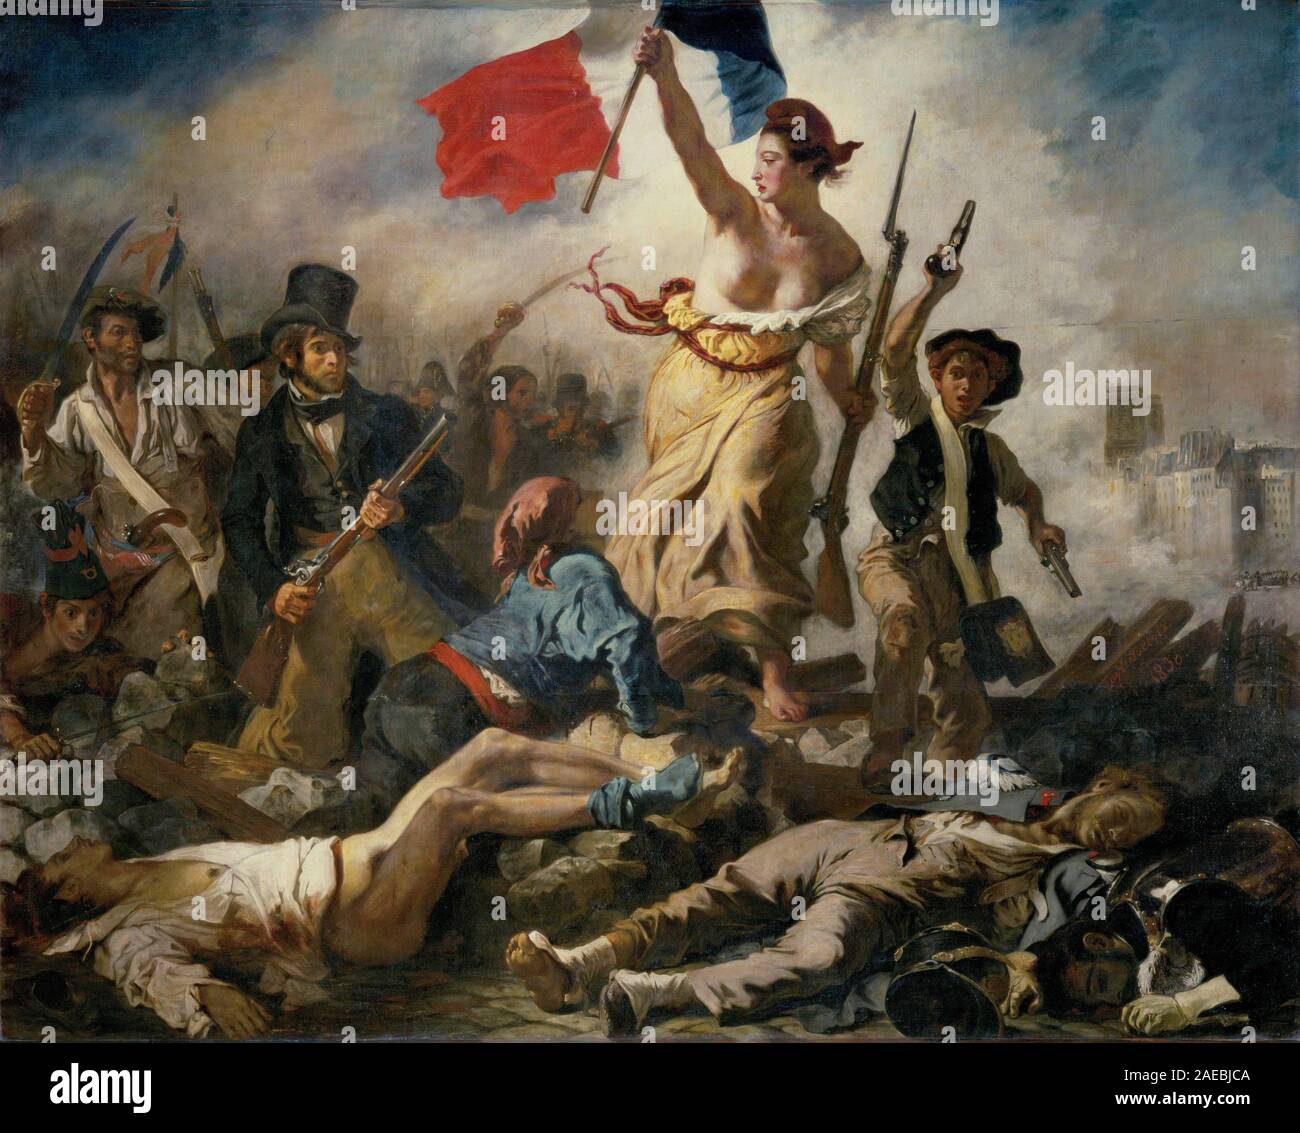 Liberty leading the People, by Eugene Delacroix, 1830, oil on canvas, Location The Louvre Museum Stock Photo